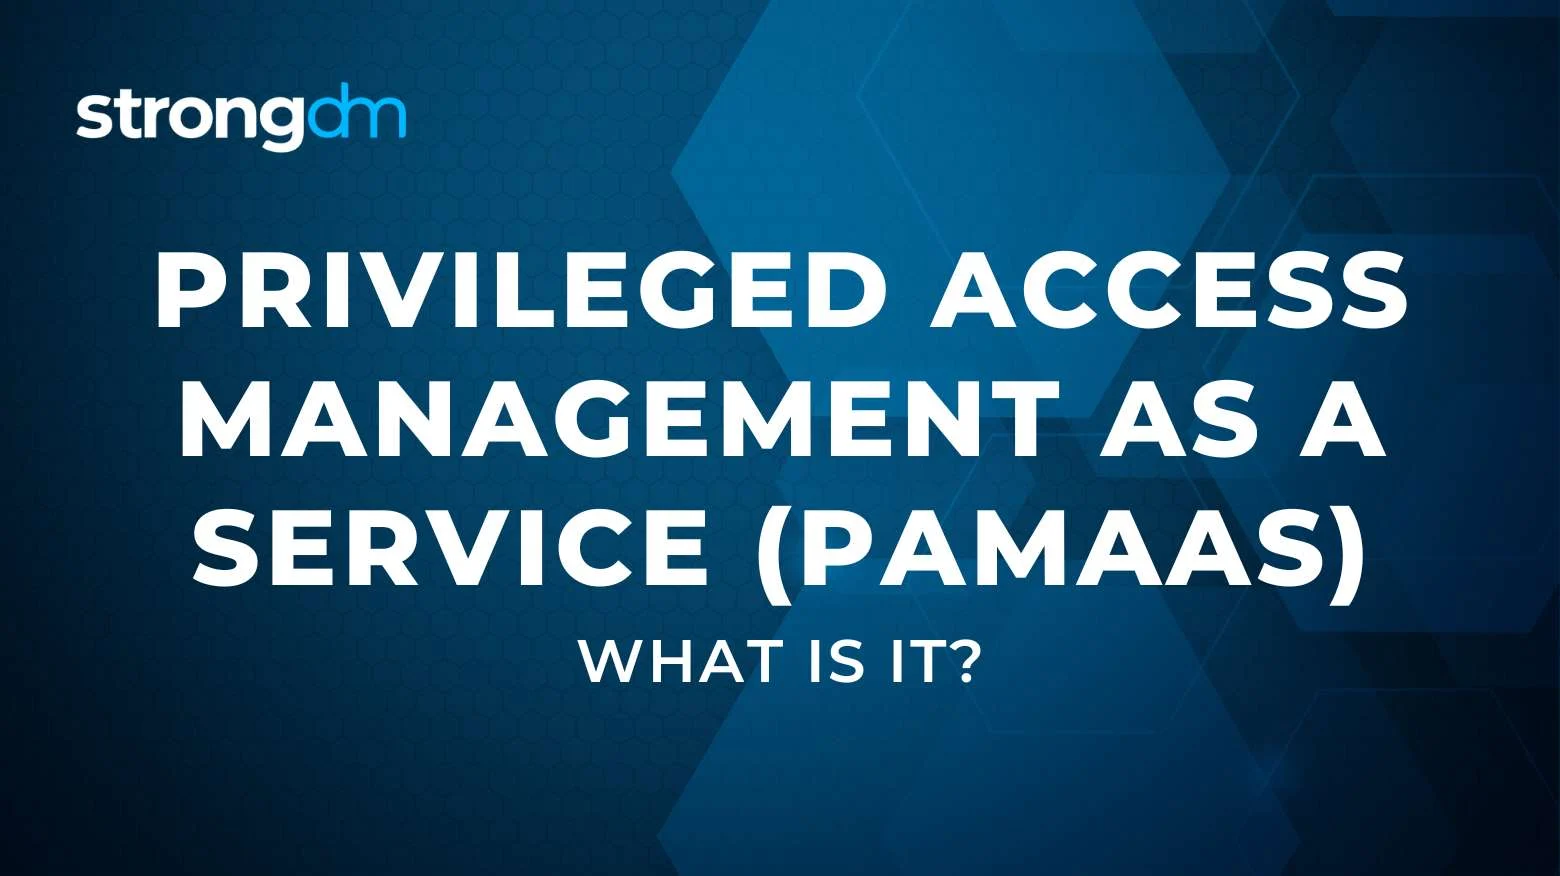 What Is Privileged Access Management as a Service (PAMaaS)?